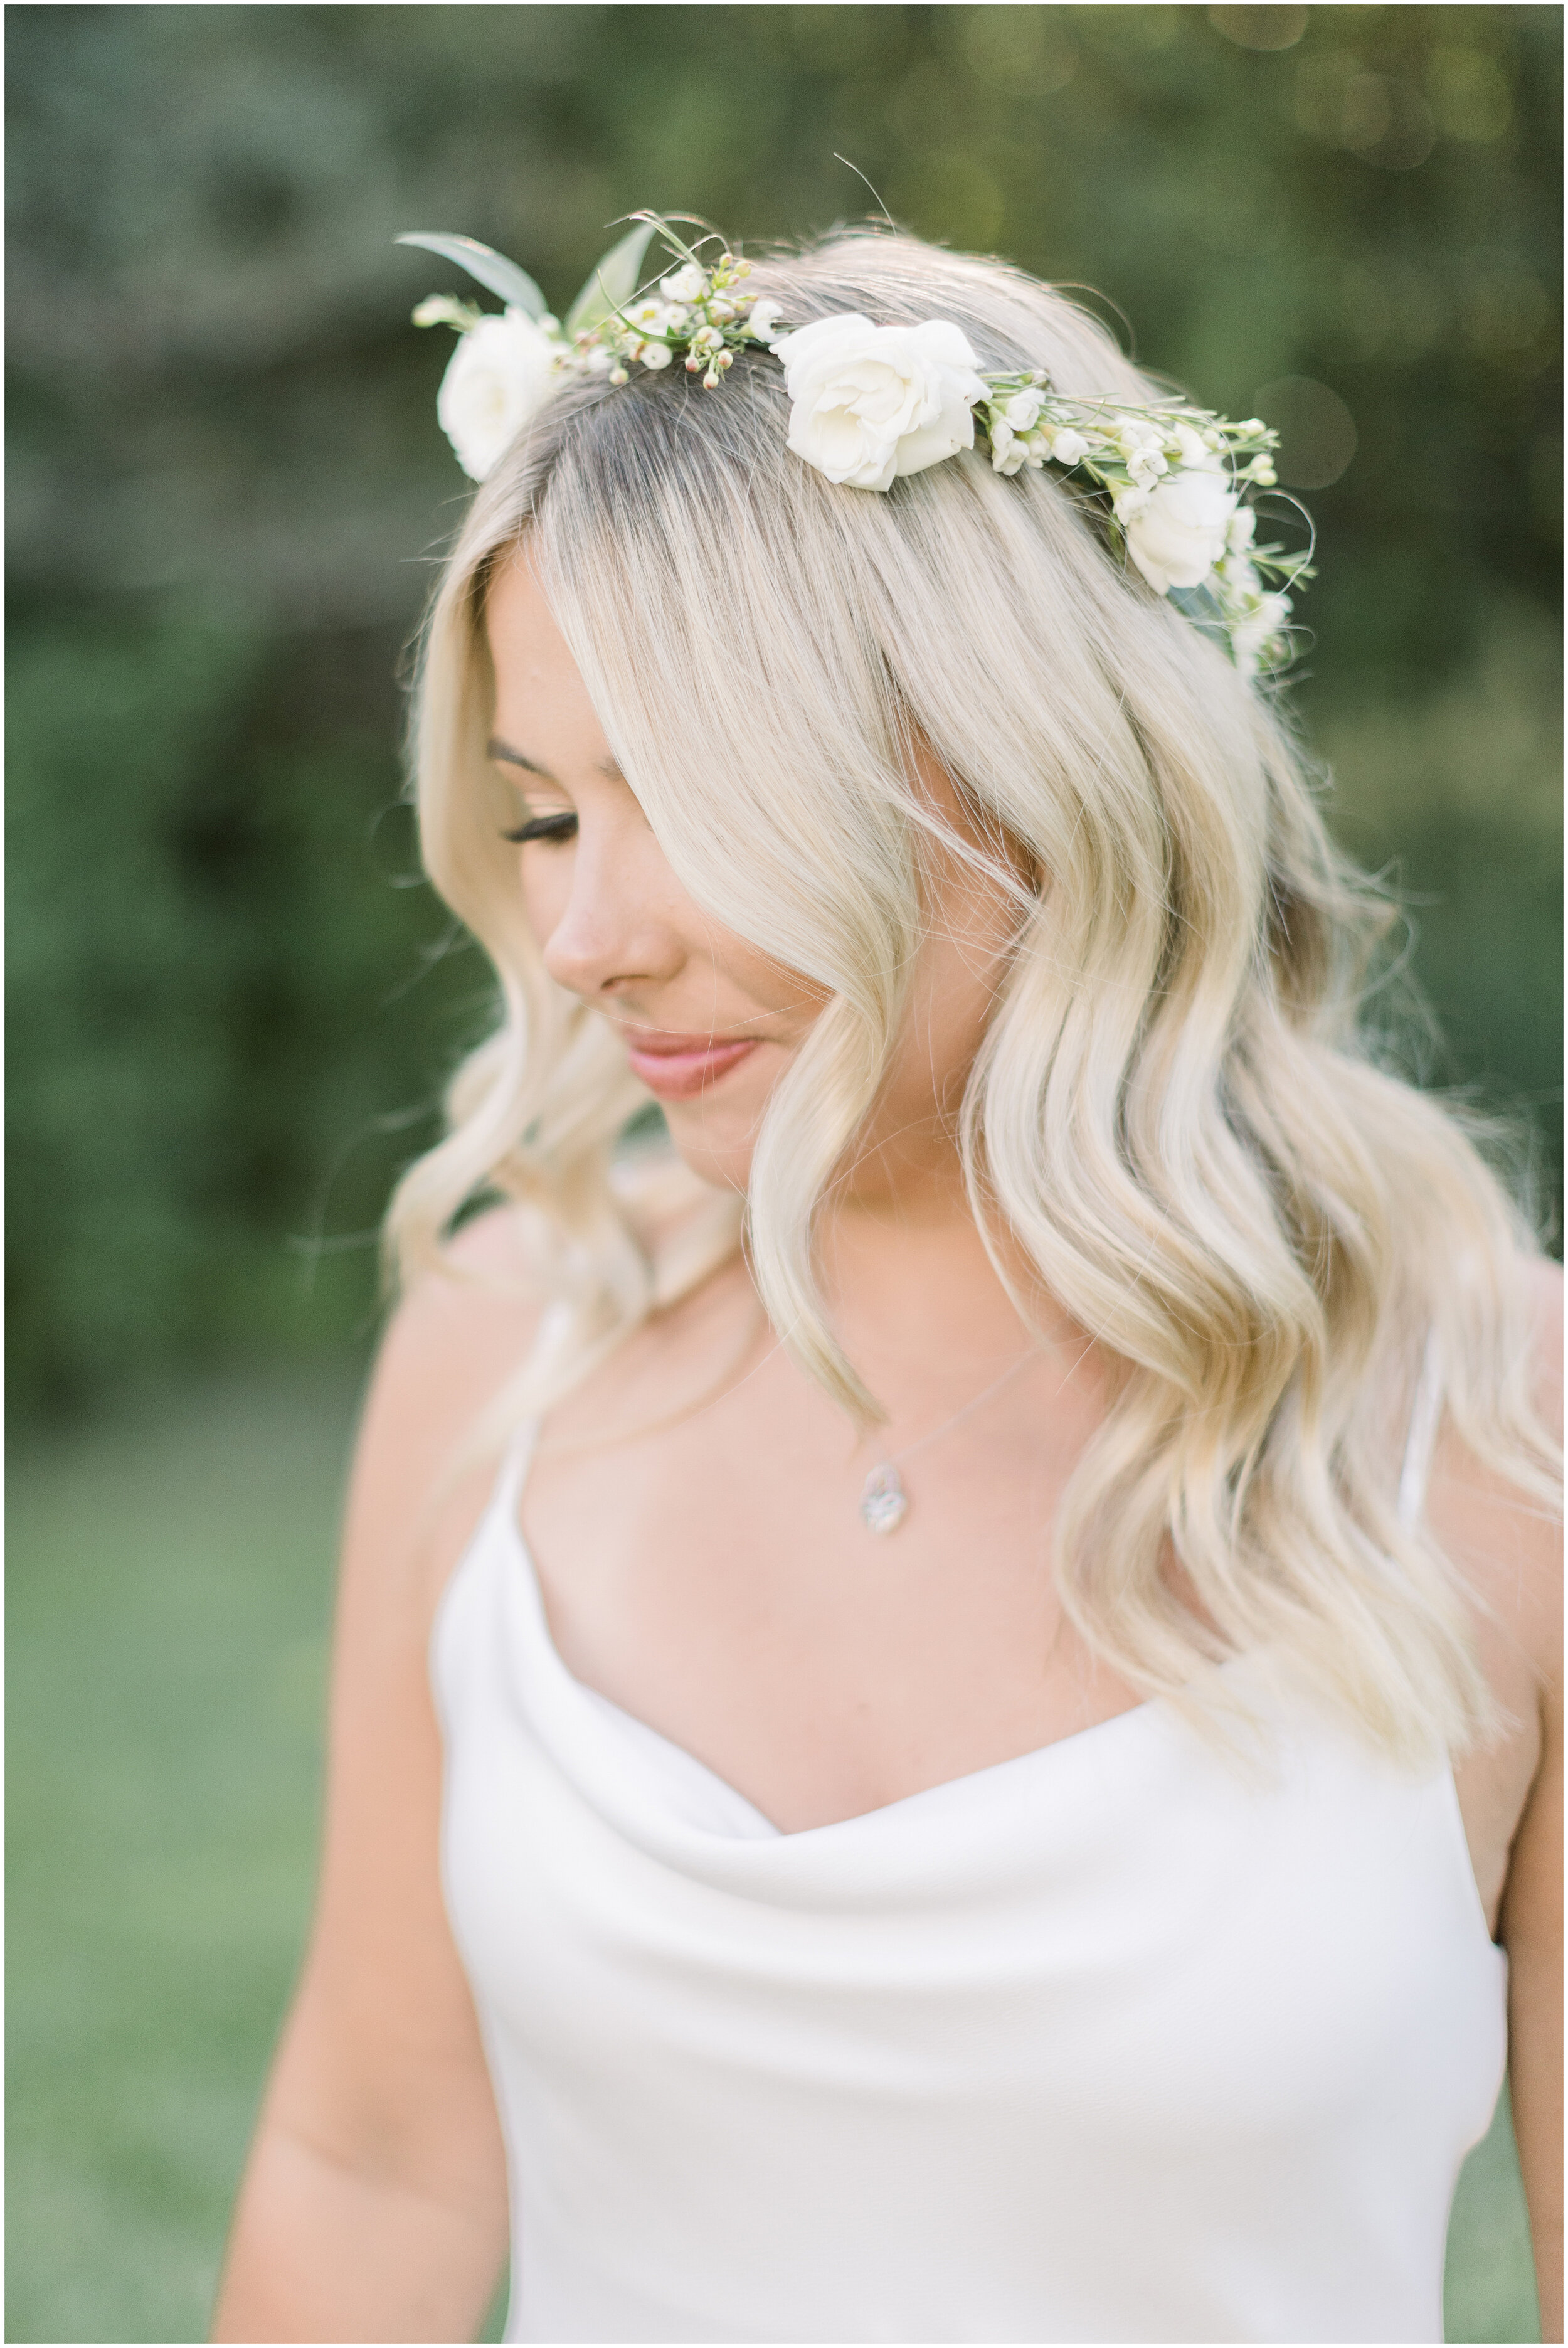  Beautiful bride with beach curled hair and simple white floral crown by Chelsea Morgan Photography in Ottawa, ON. boho hair inspo ideas for wedding hair simple wedding hair beach waves for wedding floral crown for wedding hair goals for wedding best